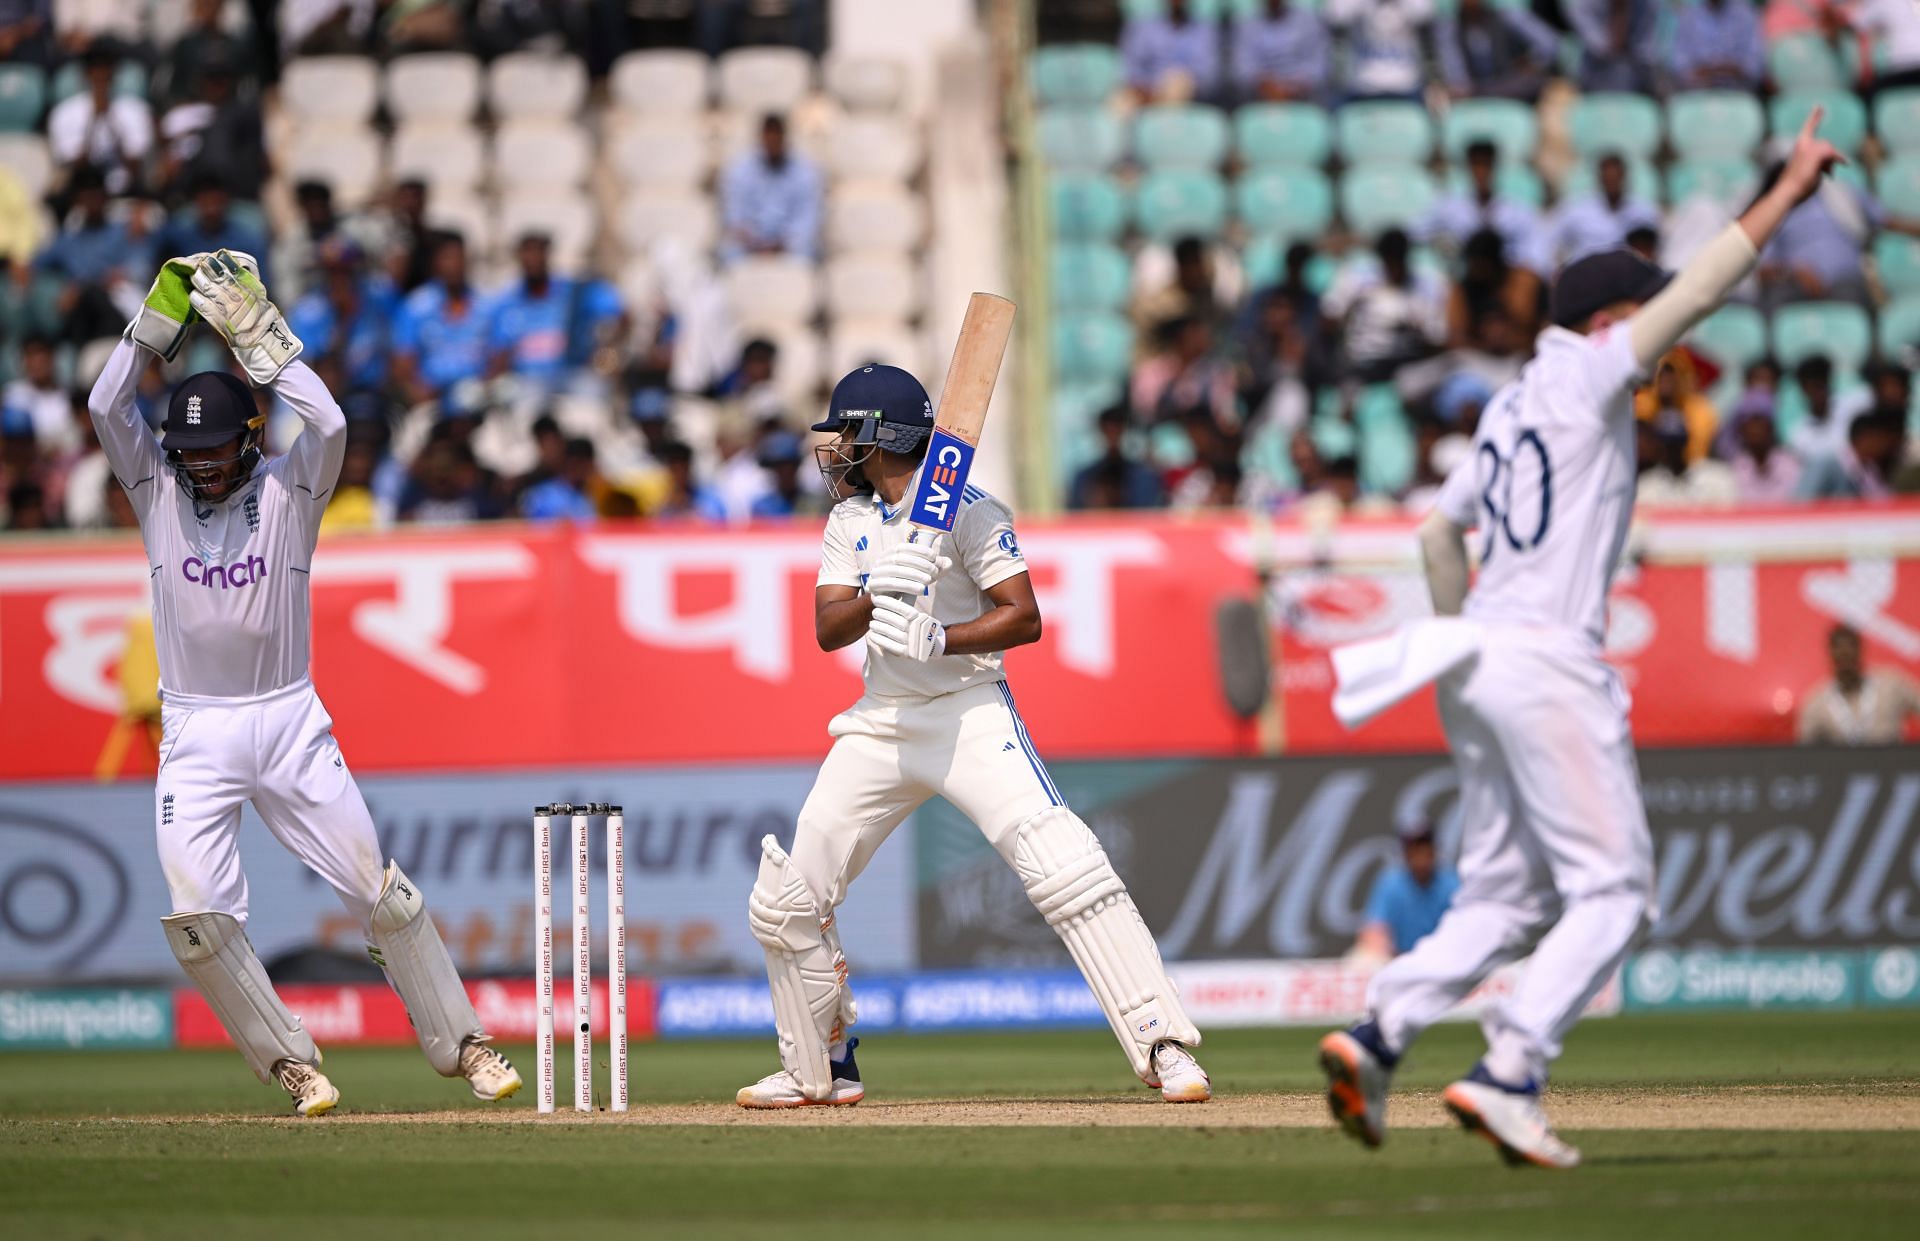 Shreyas Iyer has been dropped due to poor form. (Pic: Getty Images)